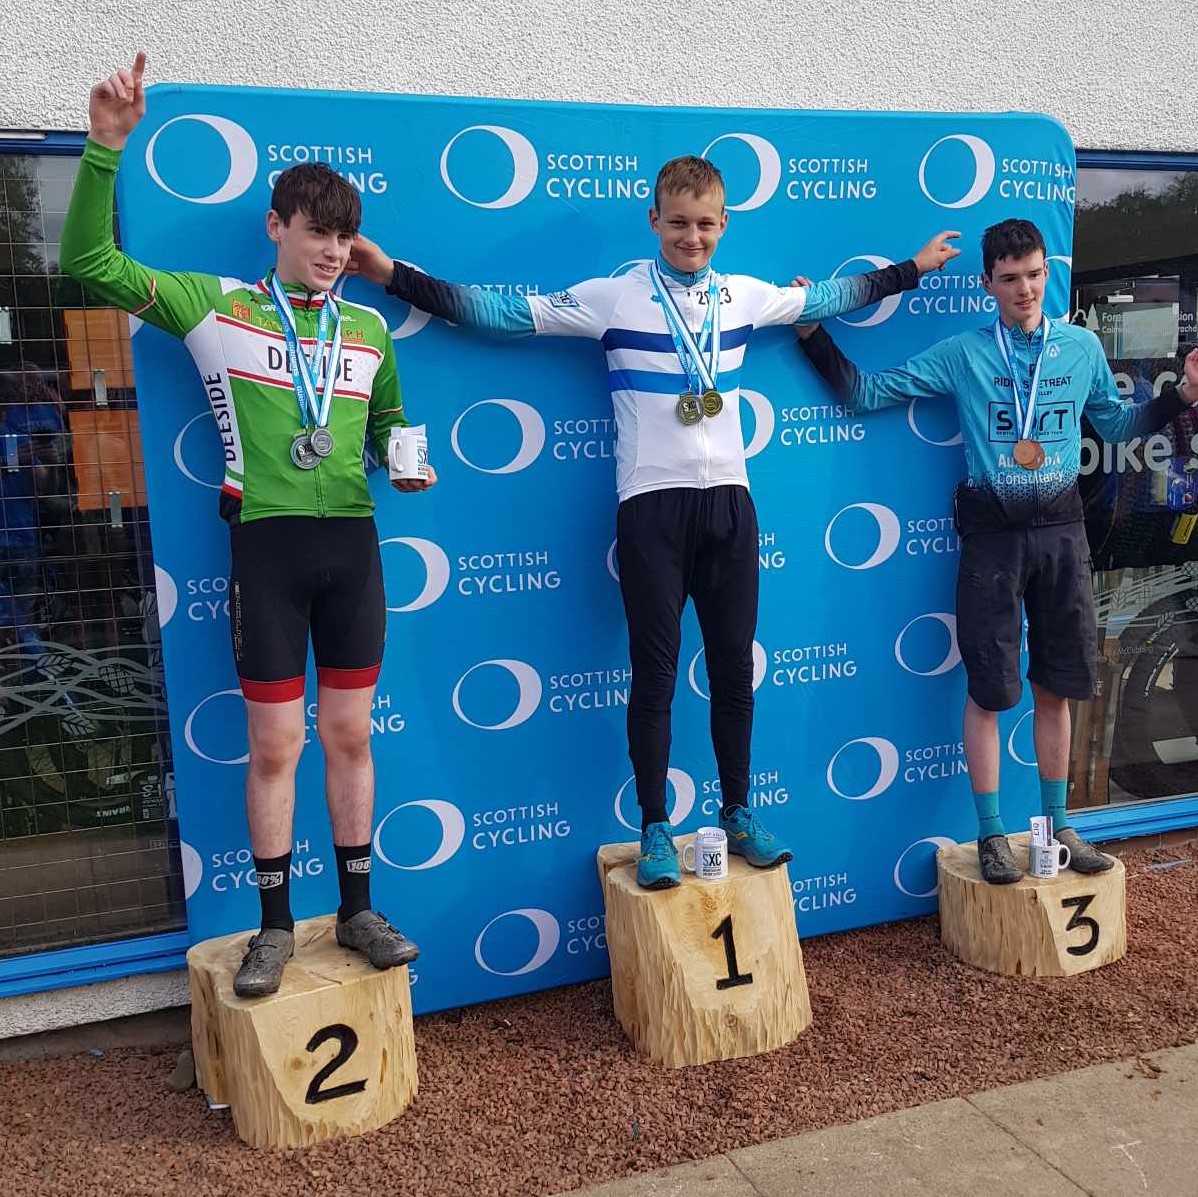 Really happy with my Scottish XC Champs & Series win. Thanks to @ScotiaOffroadRT, sponsors, all the organisers, & volunteers

1 XC race left but #crossiscoming next week as a Junior.

@Auxilium_ITC @theBicycleWorks @athleticevouk @SXC_Series @ScottishCycling @BoroughmuirPE